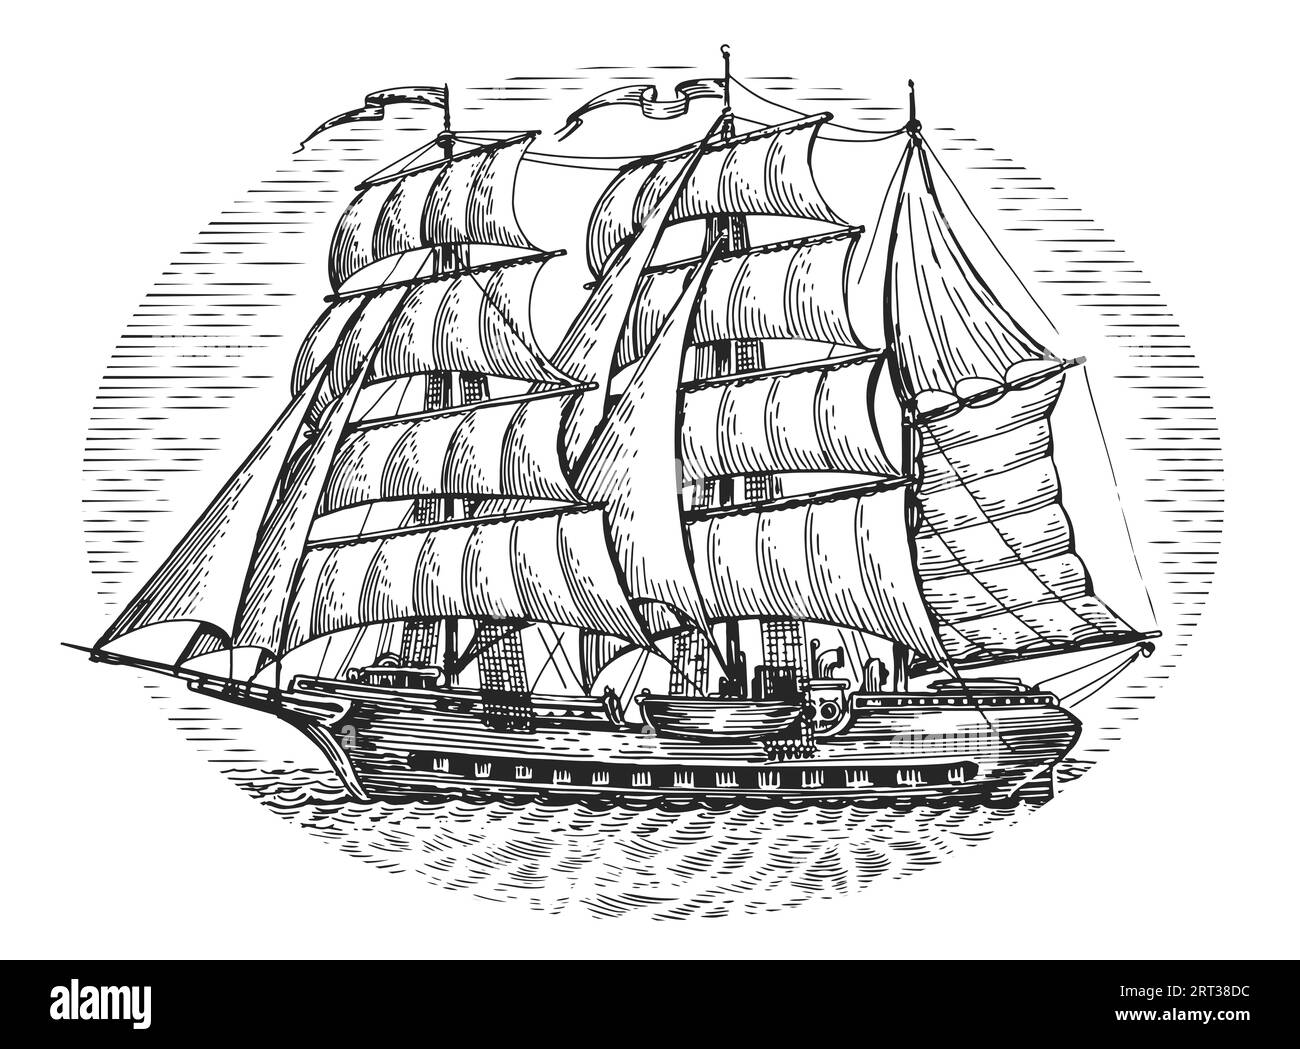 Vintage sailboat at sea sketch. Old ship with sails illustration in engraving style Stock Photo